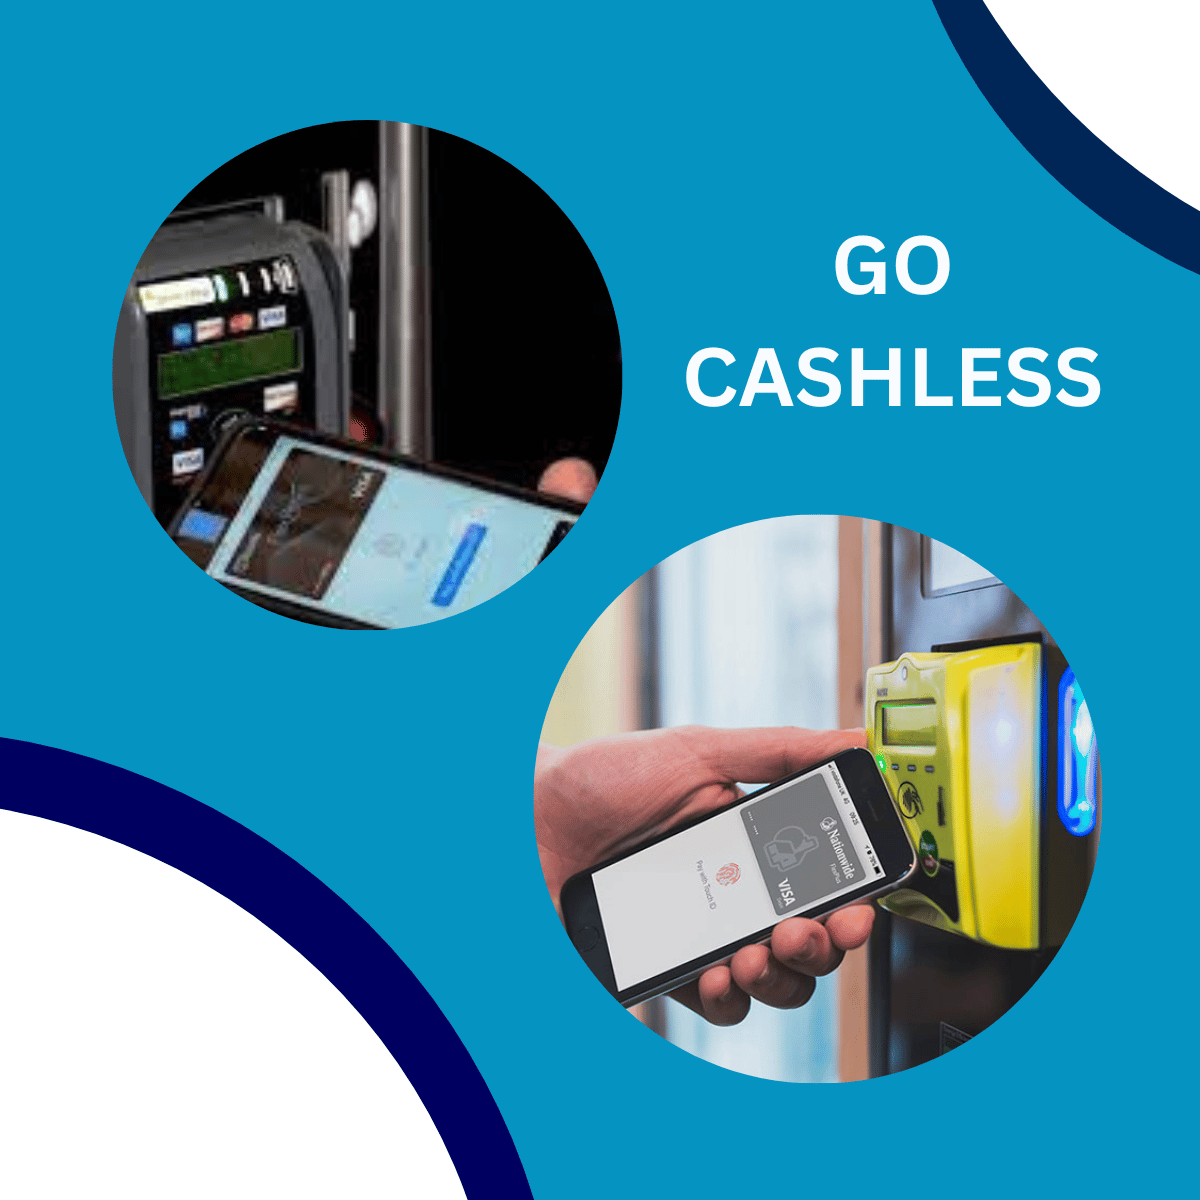 CASHLESS VENDING IS A MUST HAVE